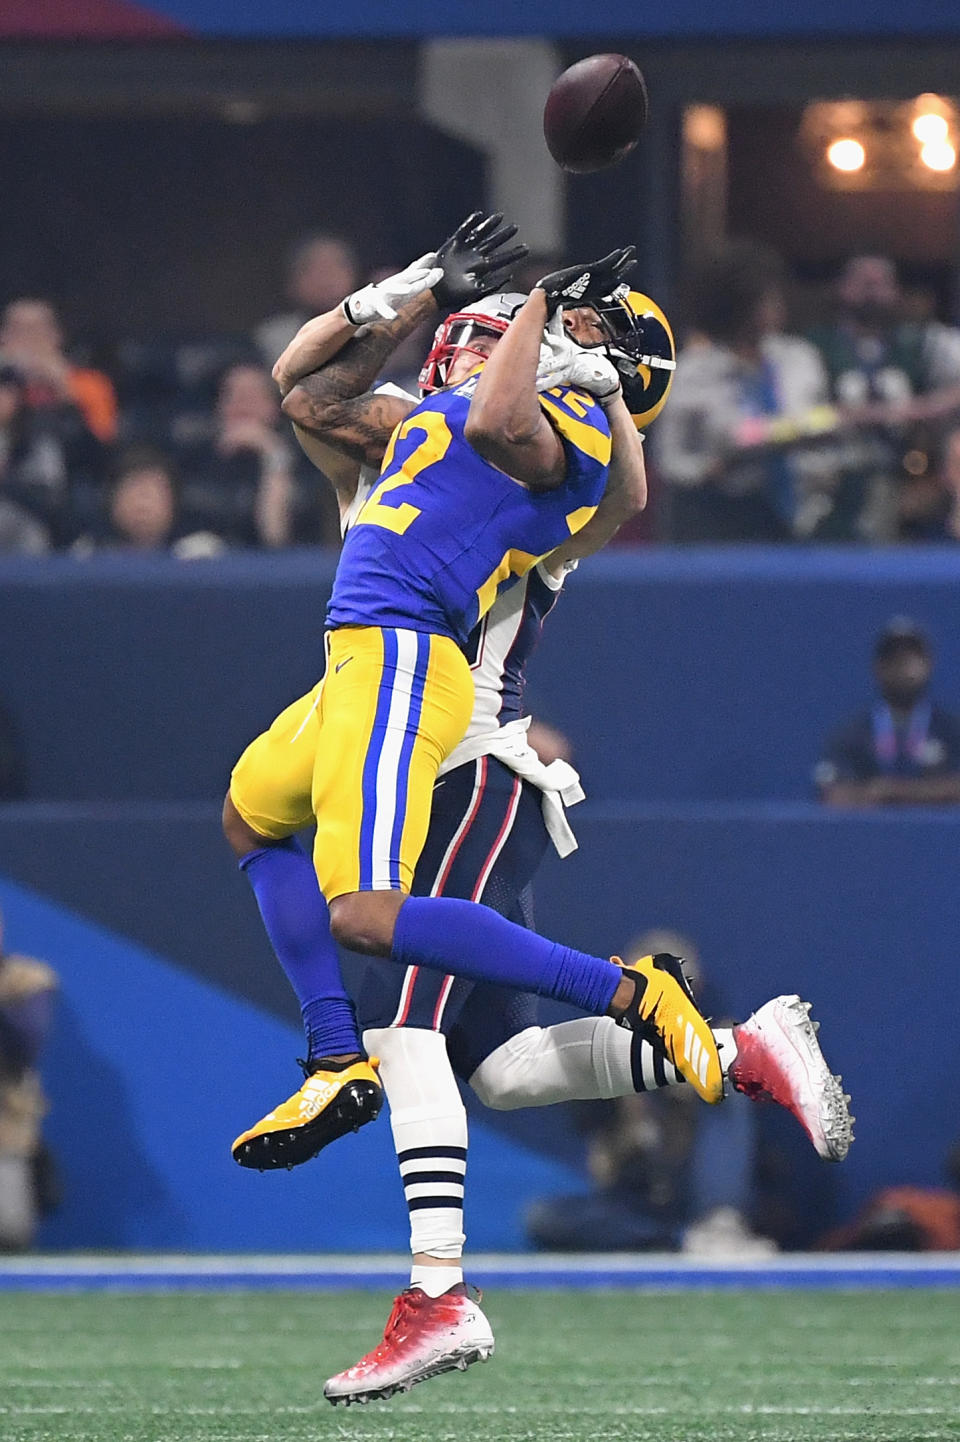 <p>Marcus Peters #22 of the Los Angeles Rams defends a pass against the New England Patriots during Super Bowl LIII at Mercedes-Benz Stadium on February 3, 2019 in Atlanta, Georgia. (Photo by Harry How/Getty Images) </p>